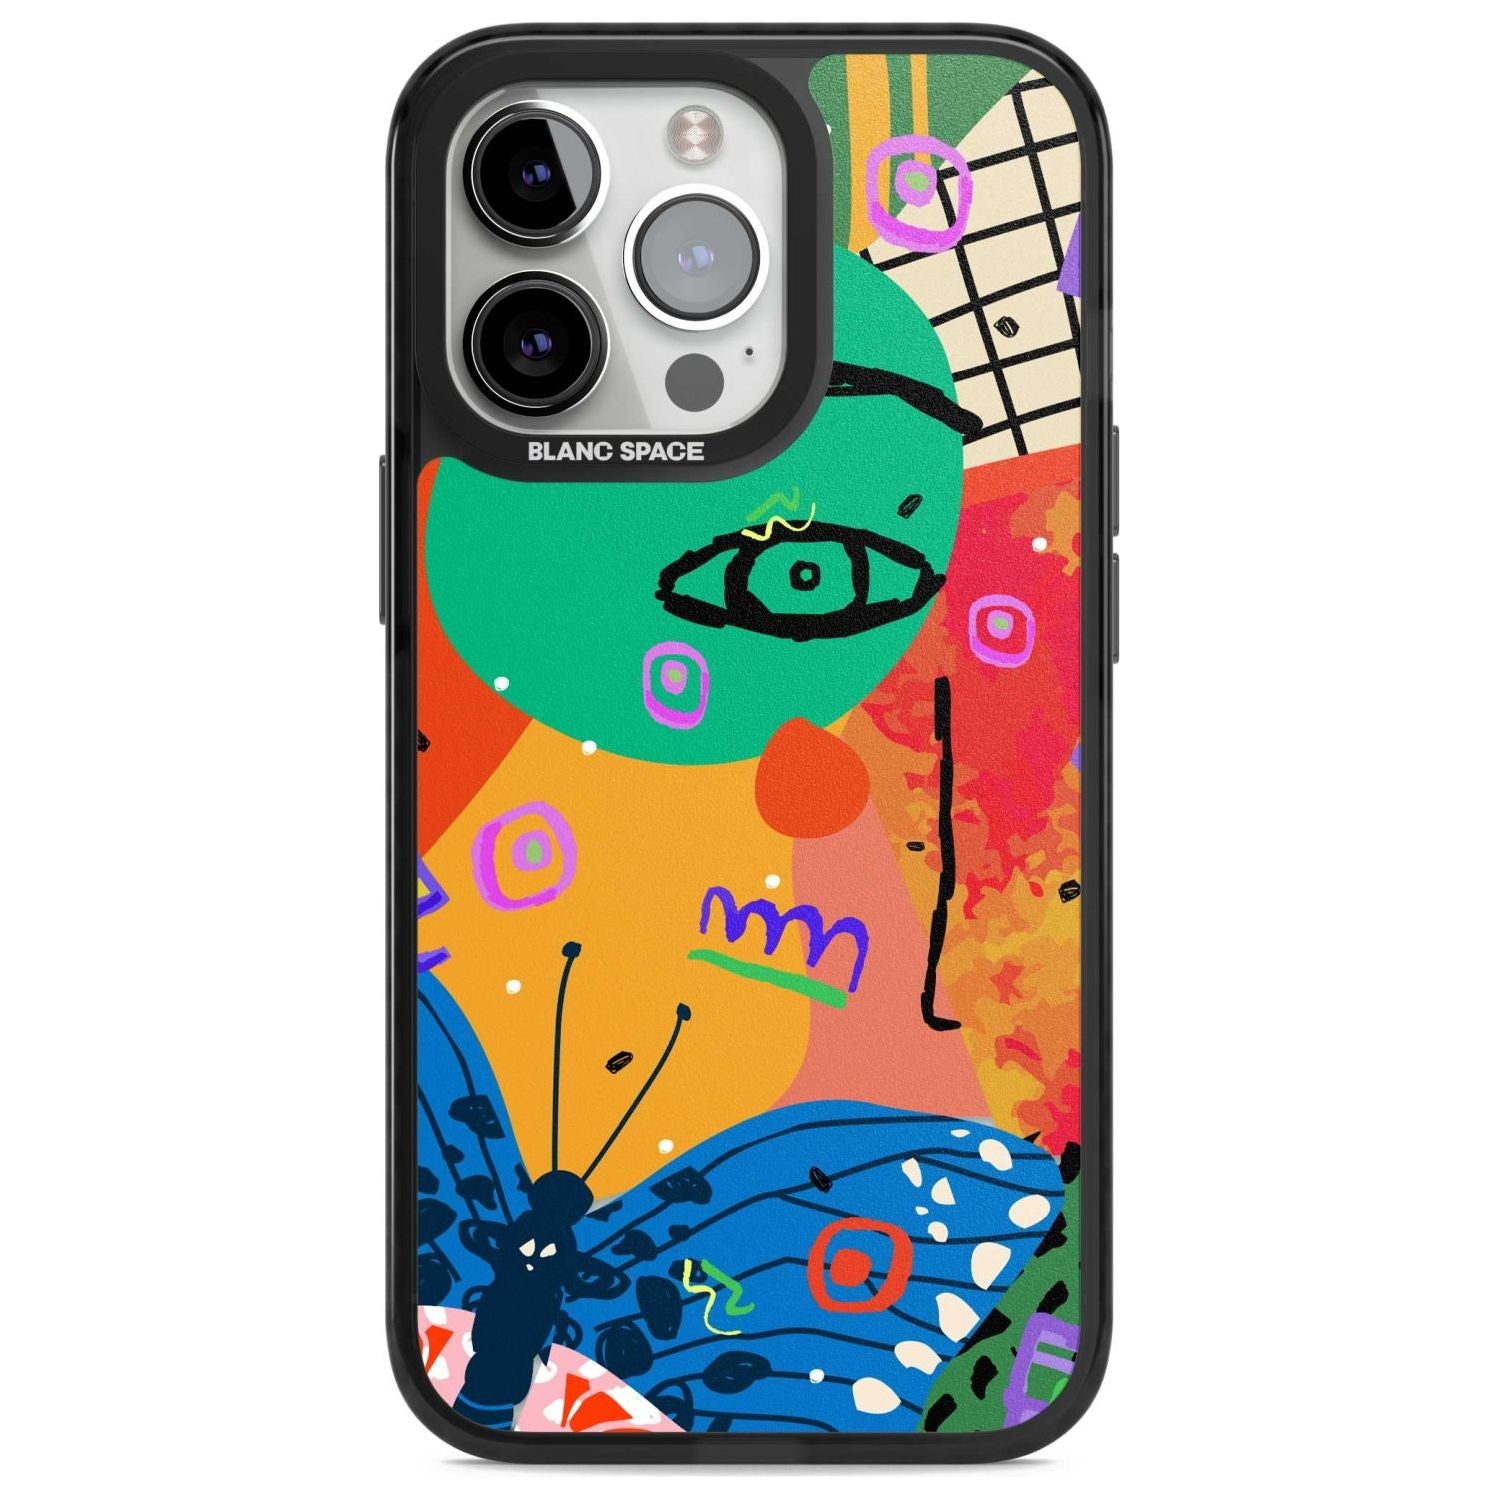 Abstract Butterfly Phone Case iPhone 15 Pro Max / Magsafe Black Impact Case,iPhone 15 Pro / Magsafe Black Impact Case,iPhone 14 Pro Max / Magsafe Black Impact Case,iPhone 14 Pro / Magsafe Black Impact Case,iPhone 13 Pro / Magsafe Black Impact Case Blanc Space